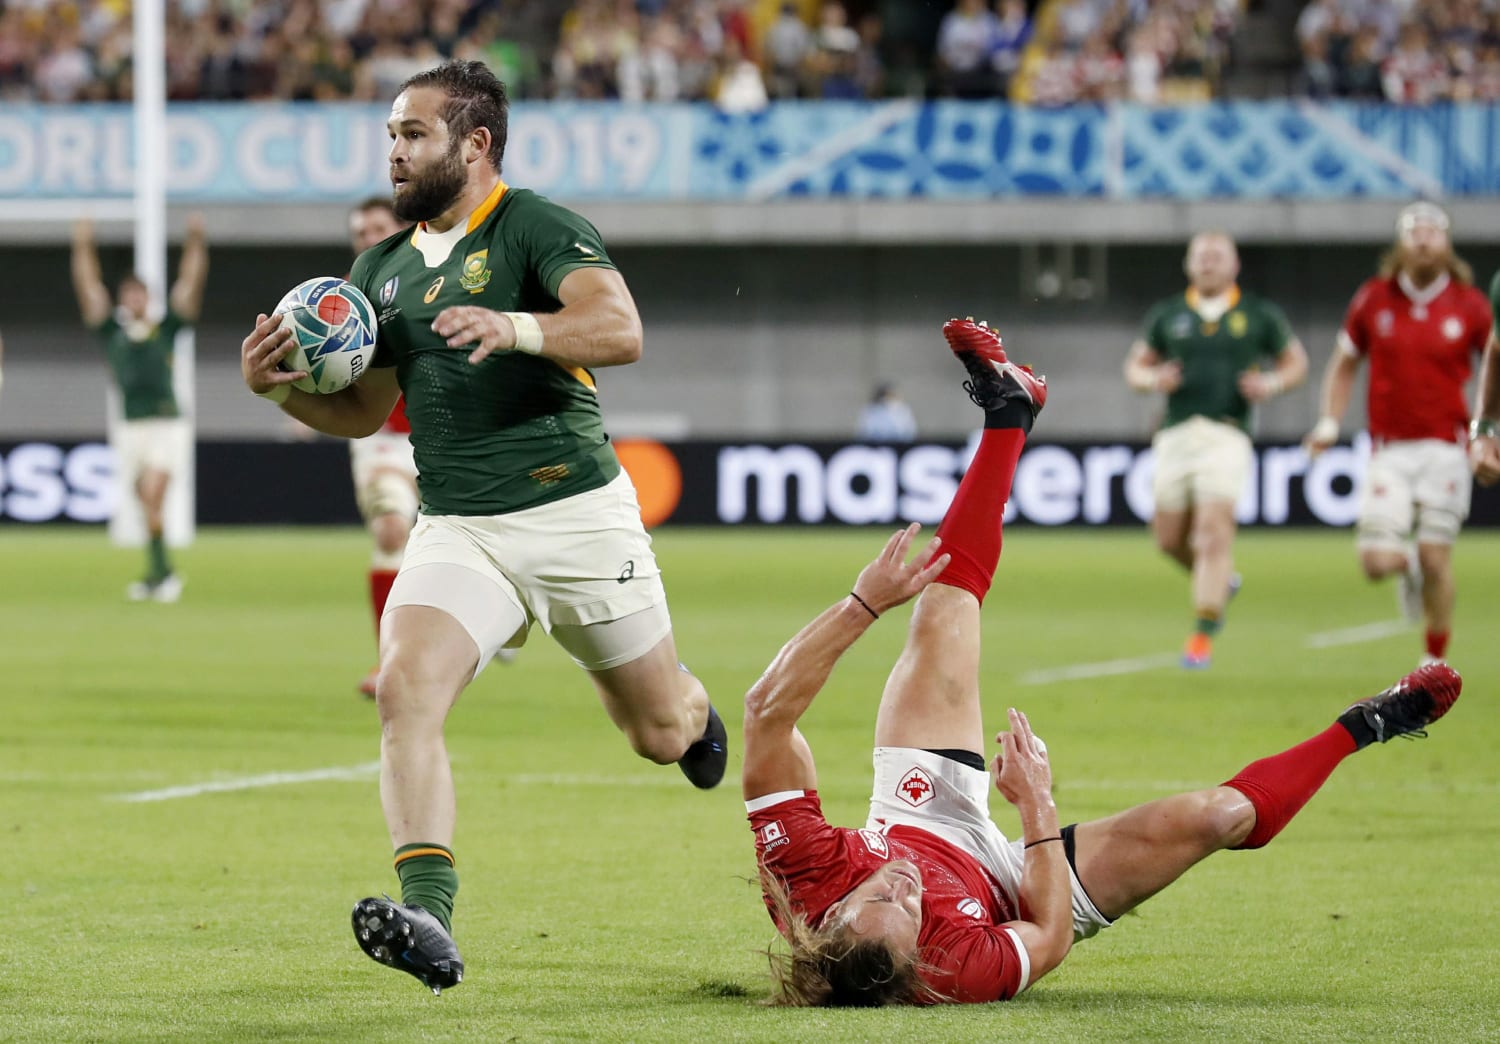 South Africa demolishes Canada 66-7, all but into quarters